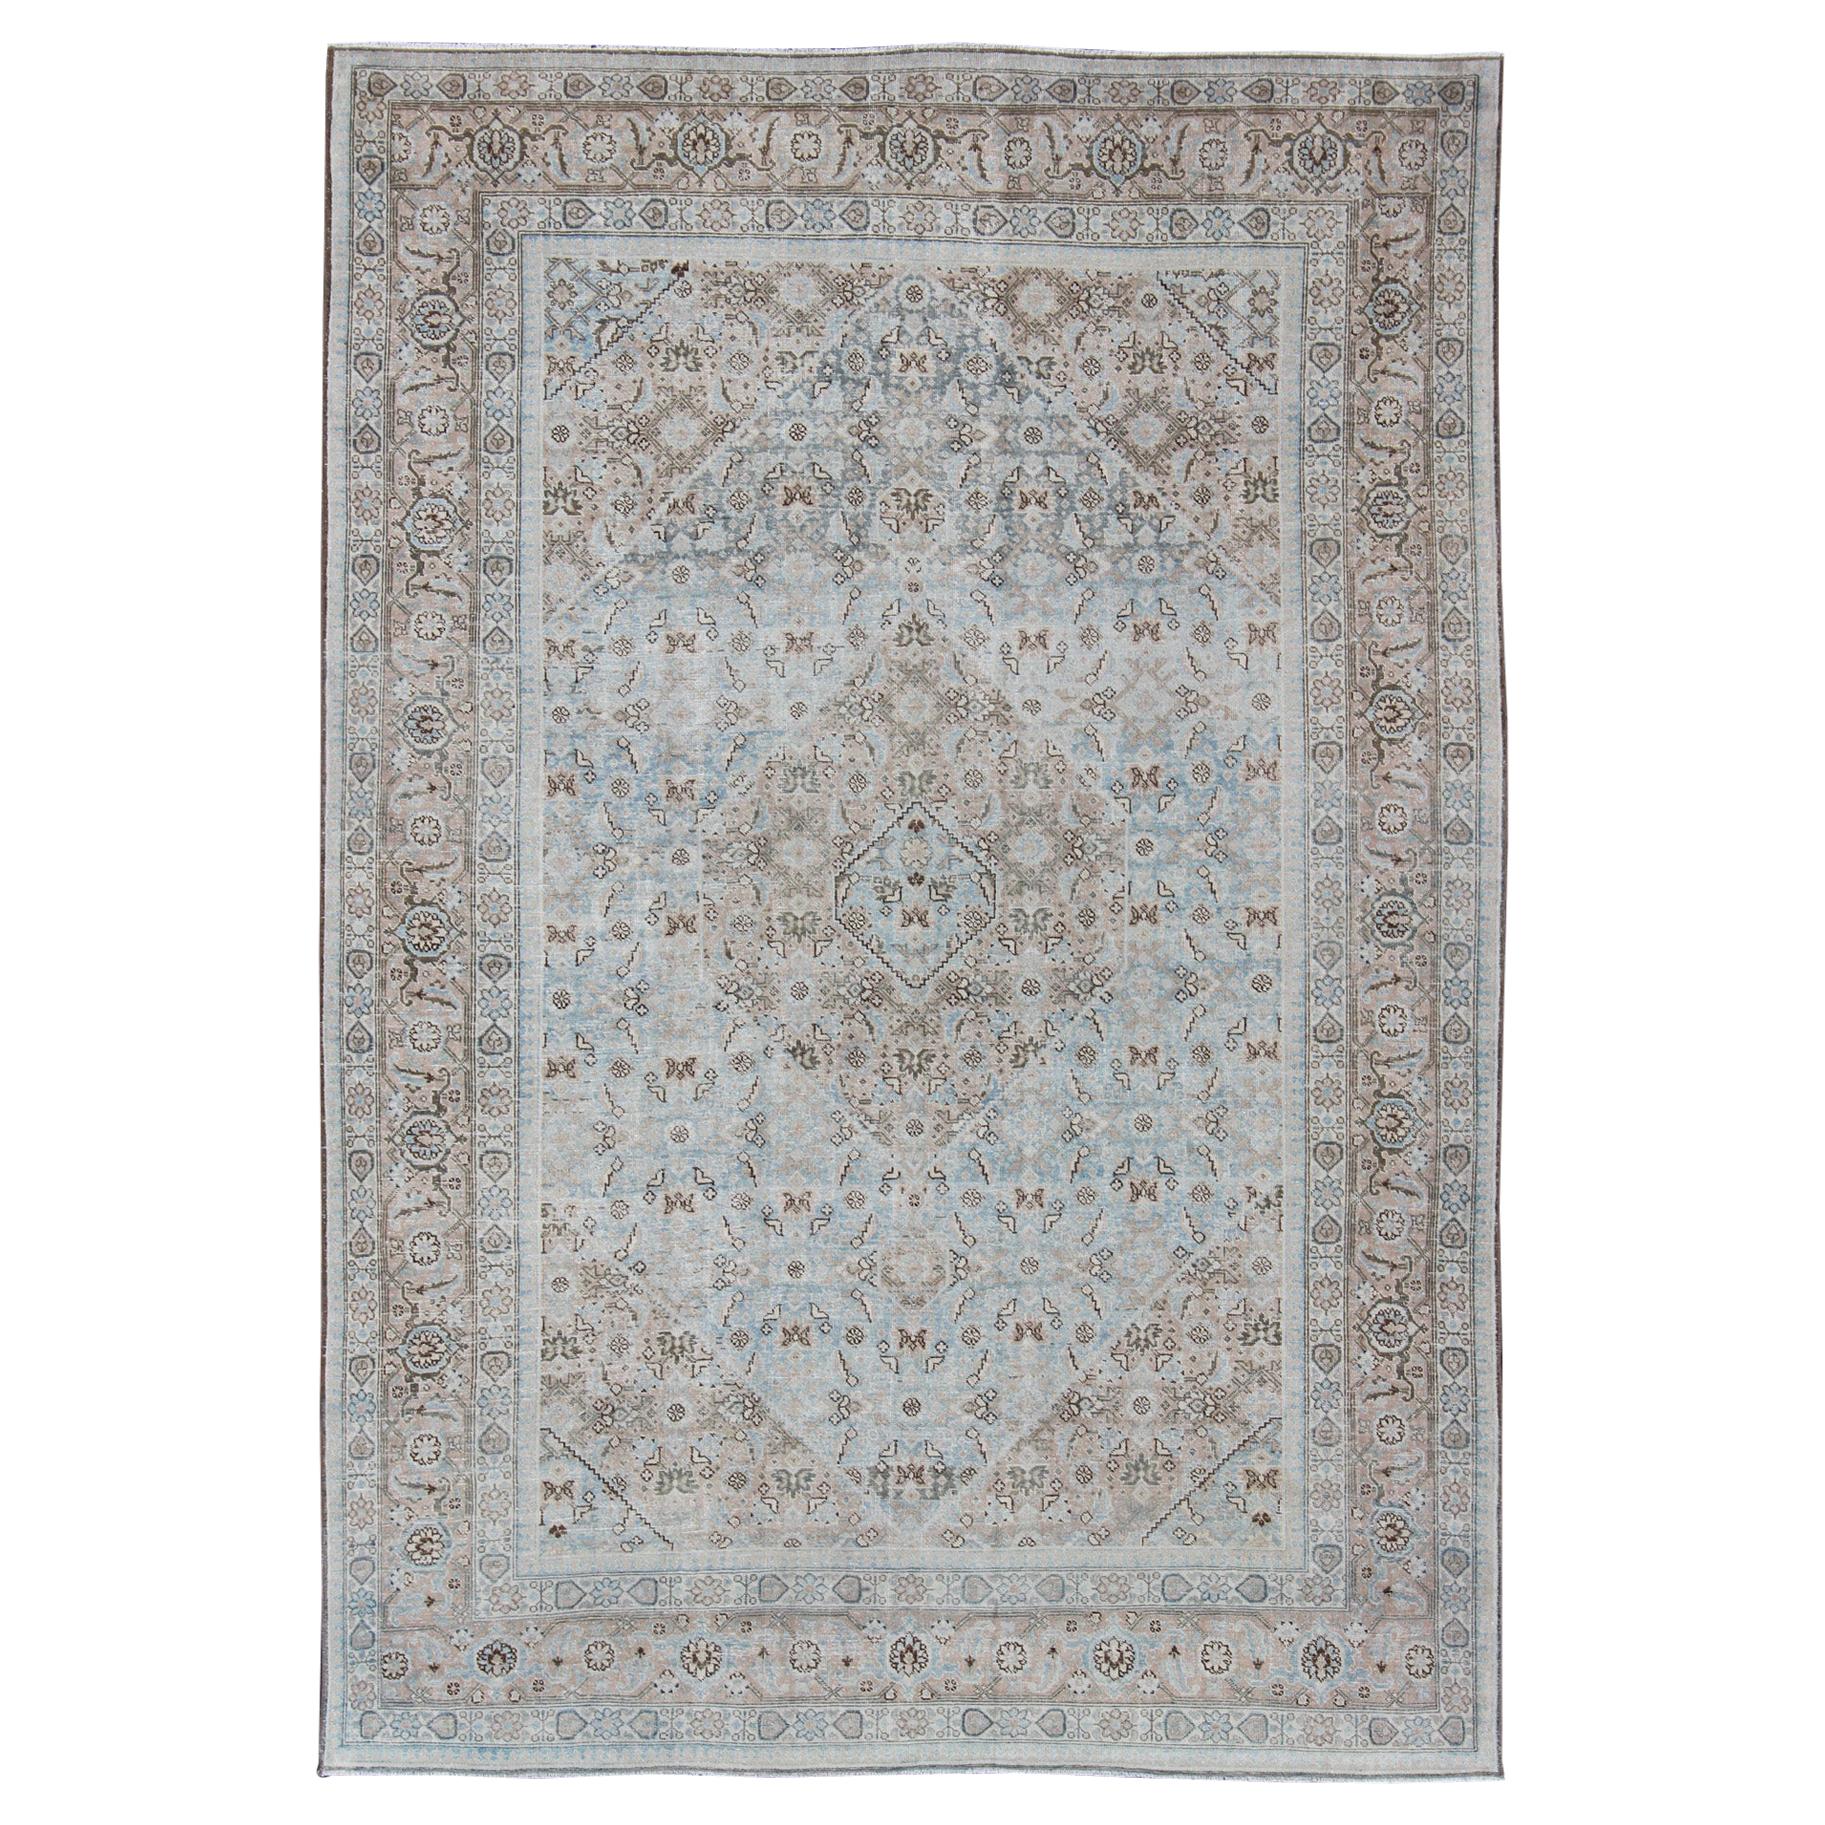 Stylized Persian Antique Tabriz Rug with Medallion Design and Muted Colors